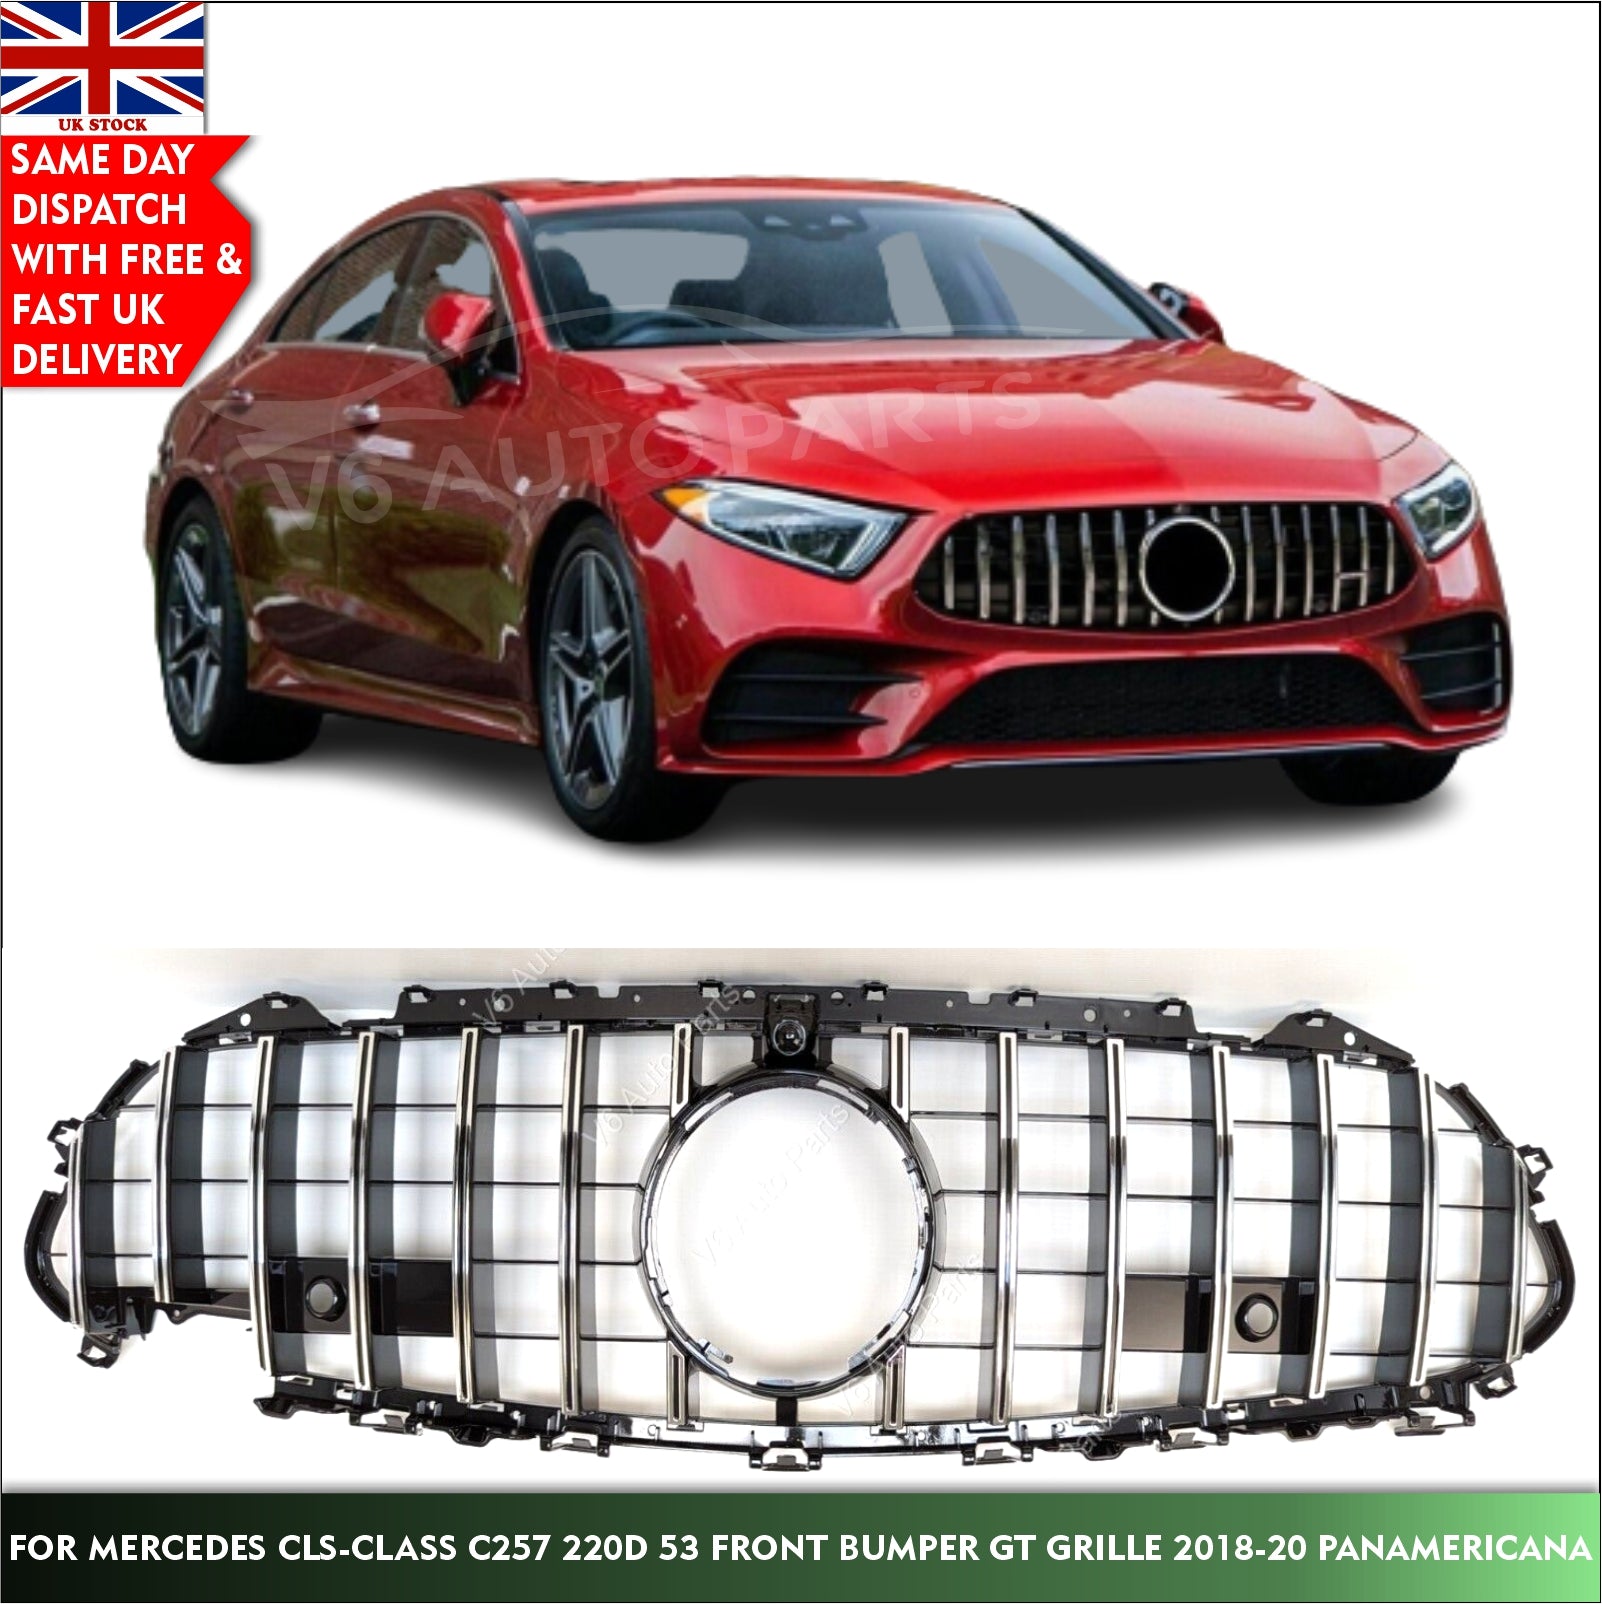 For Mercedes CLS-Class W257 CLS400 Front Bumper Grille 2018-2020 Panamericana GT